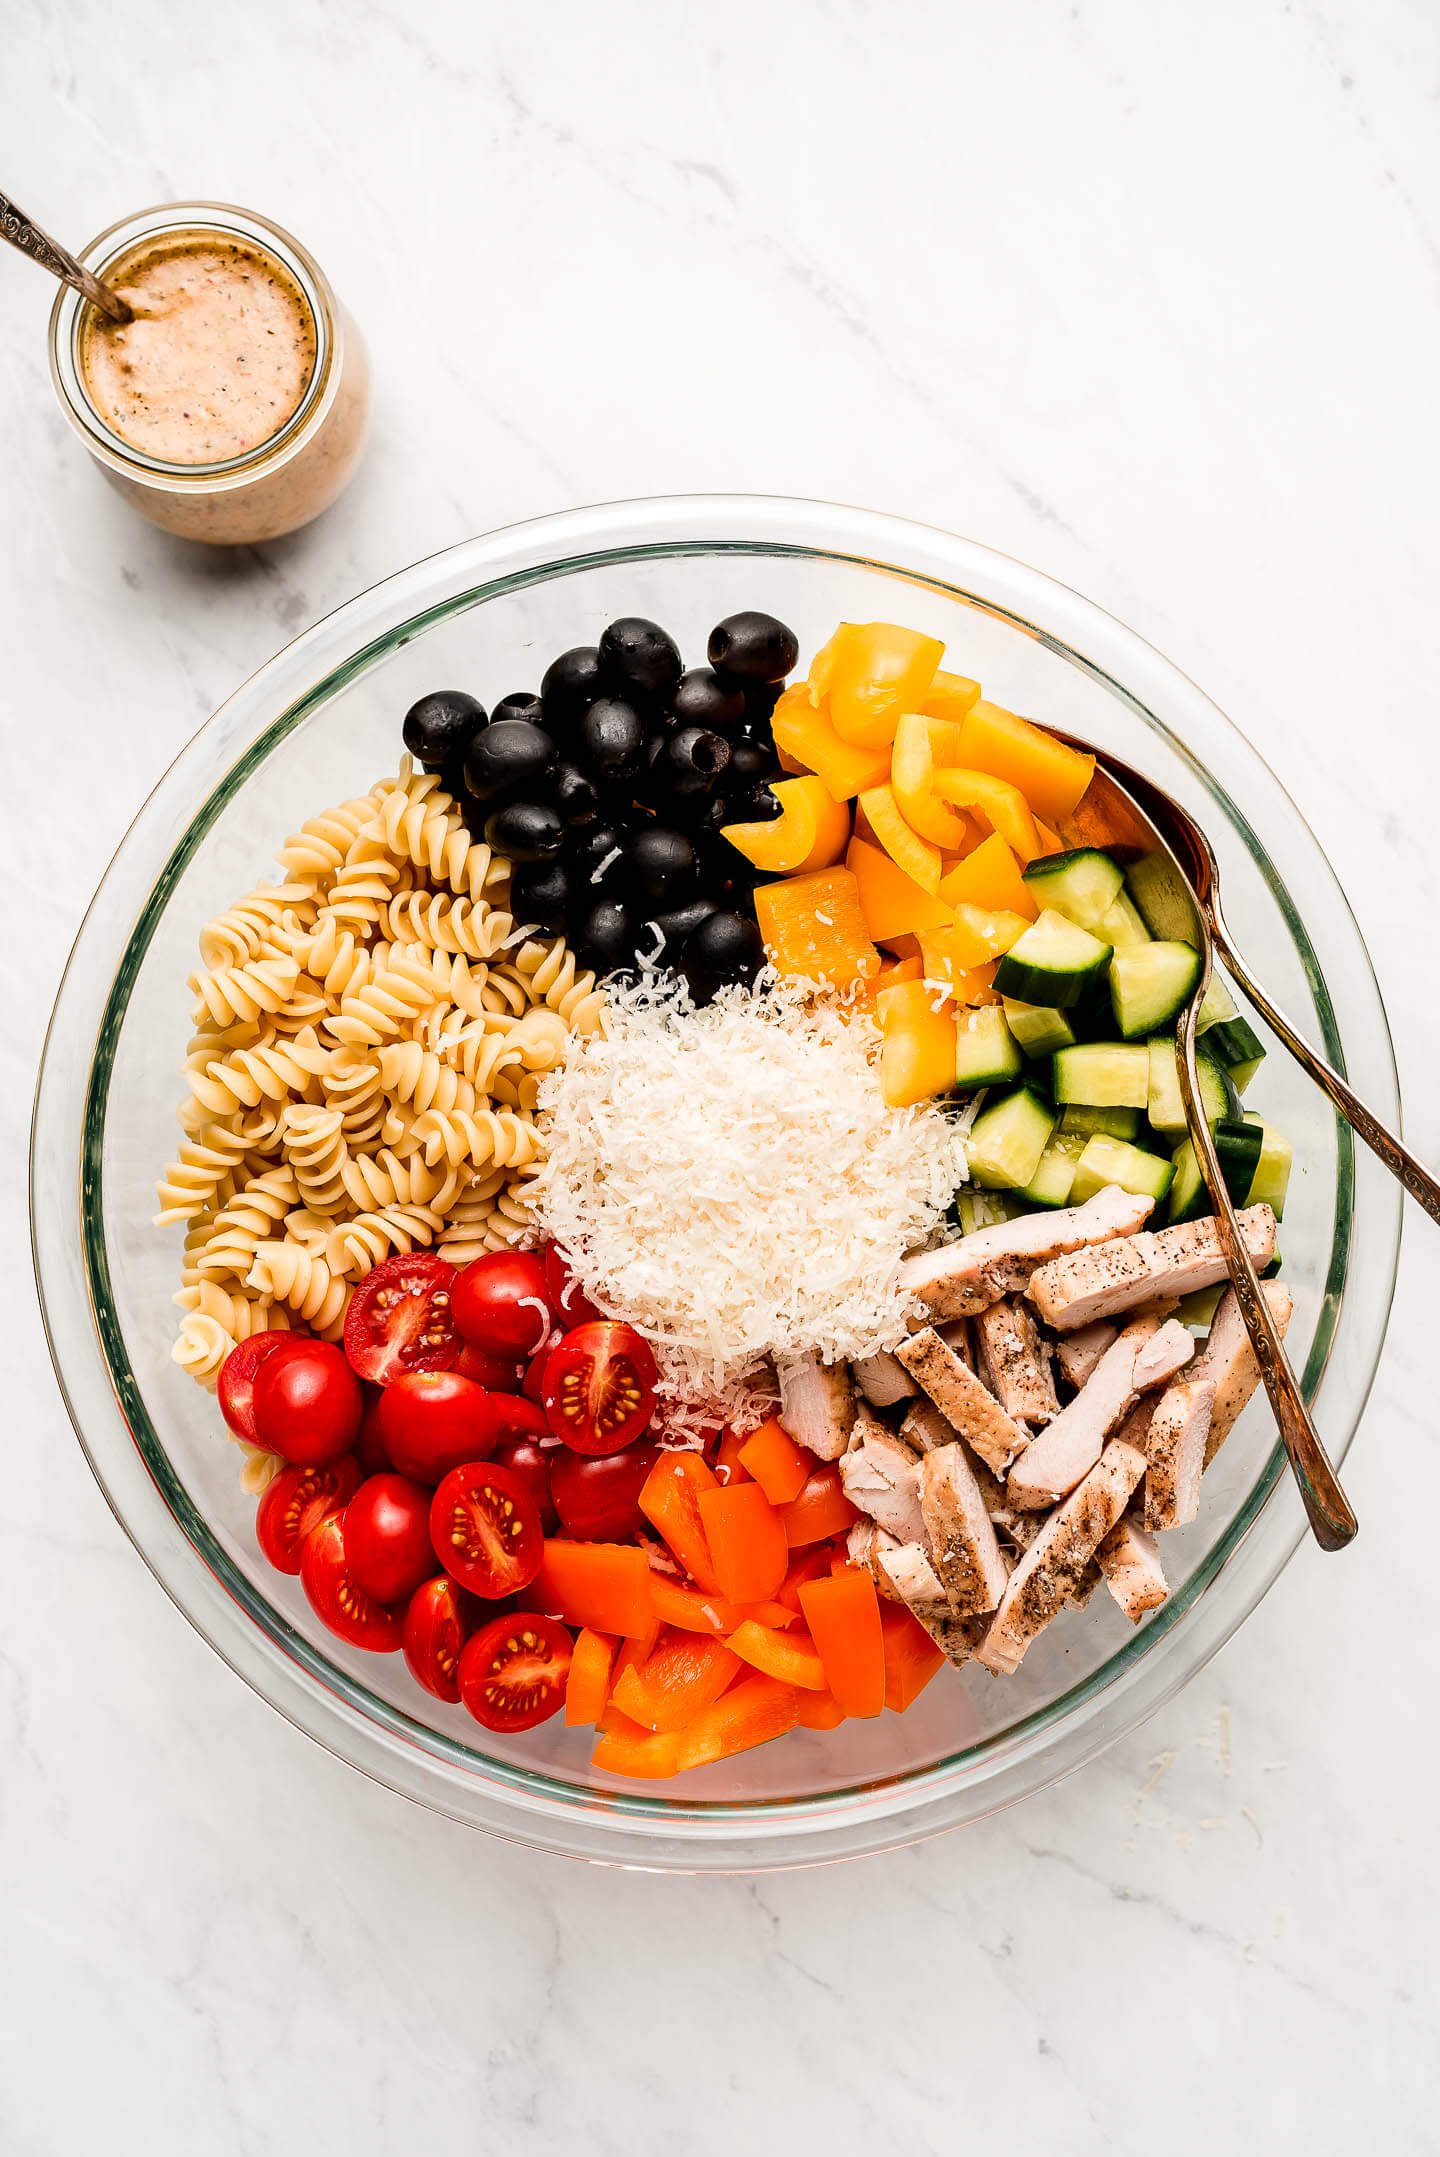 A bowl of separated ingredients- olives, peppers, cucumbers, grilled chicken, tomatoes, pasta, with a jar of dressing.